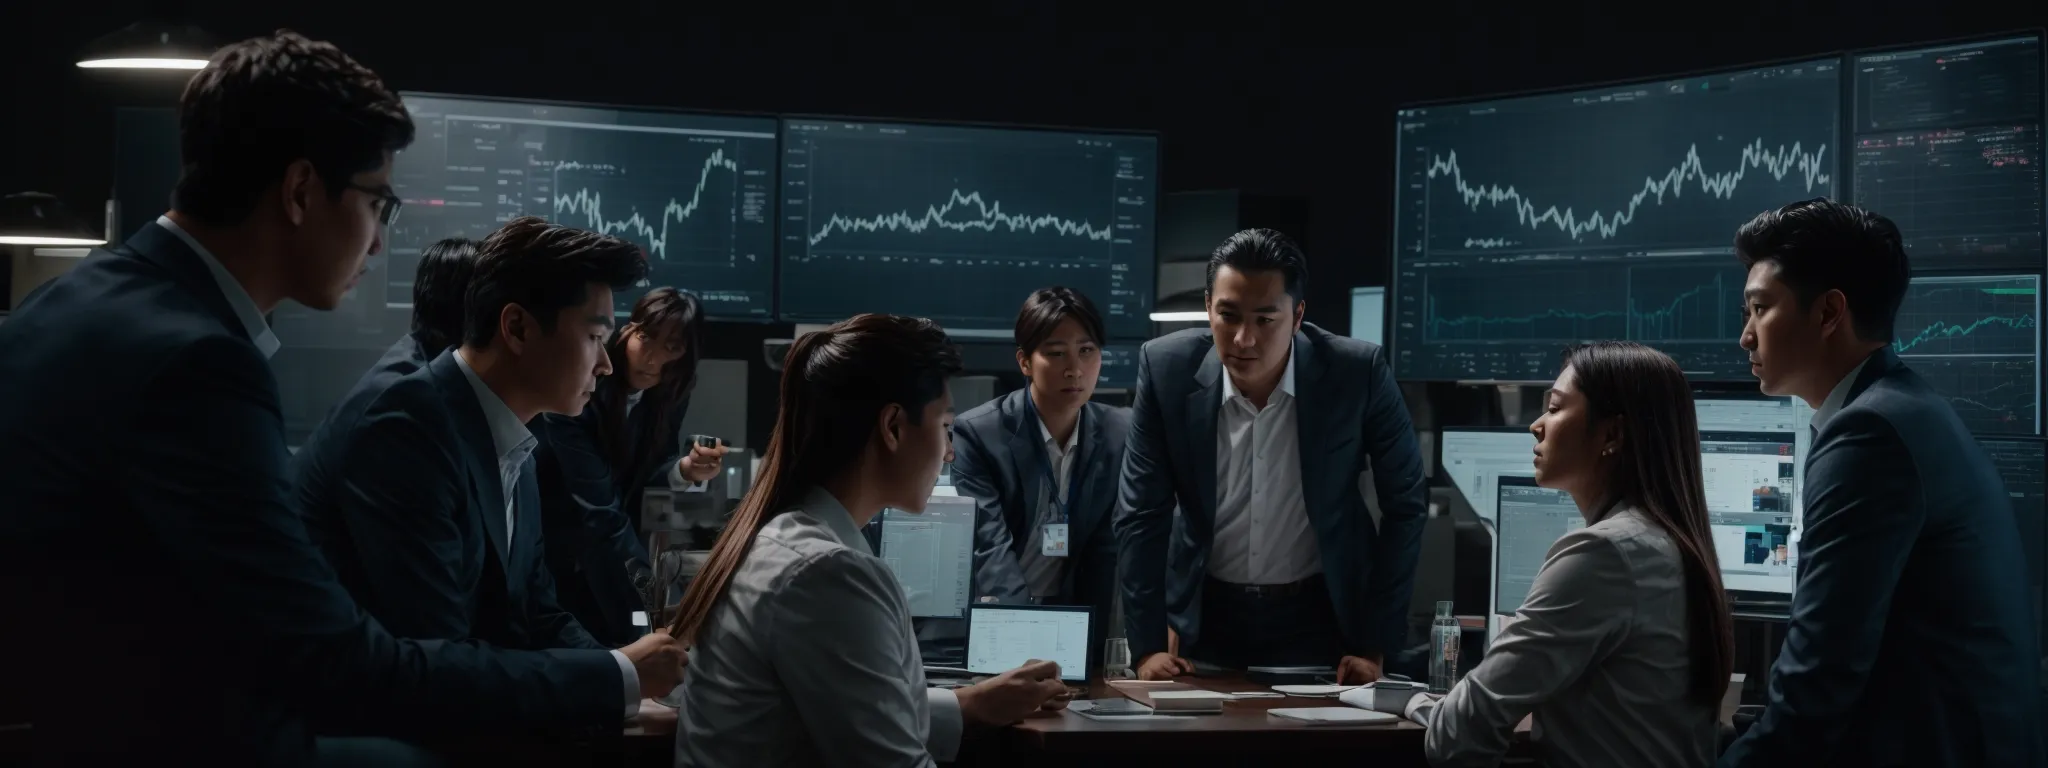 a strategic team huddles around a large monitor displaying seo analytics and graphs, embracing the spirit of analytical competition.